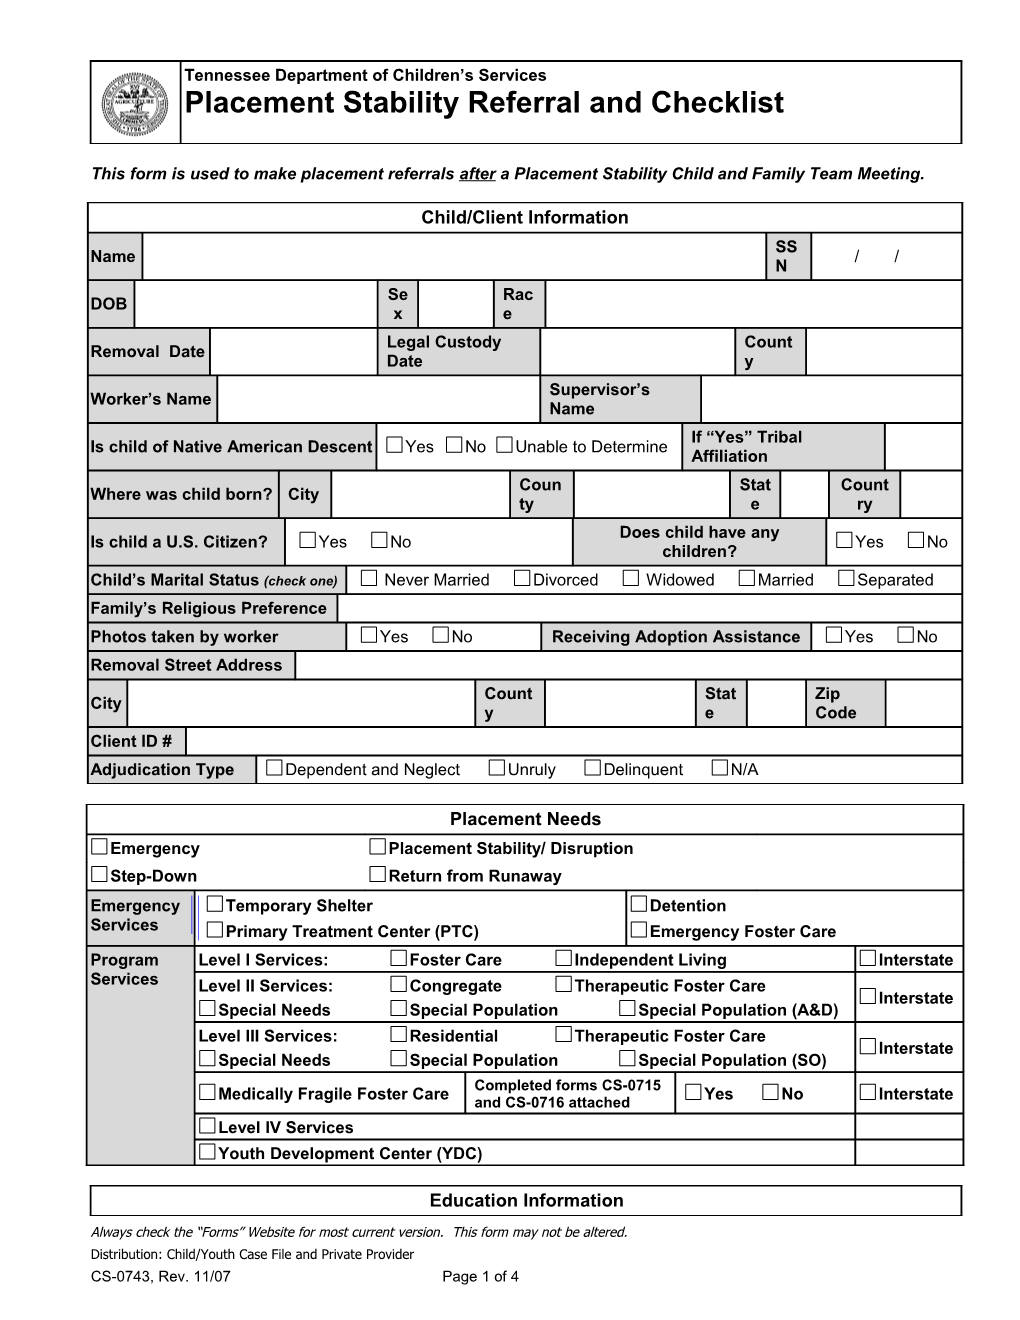 This Form Is Used to Make Placement Referrals After a Placement Stability Child and Family